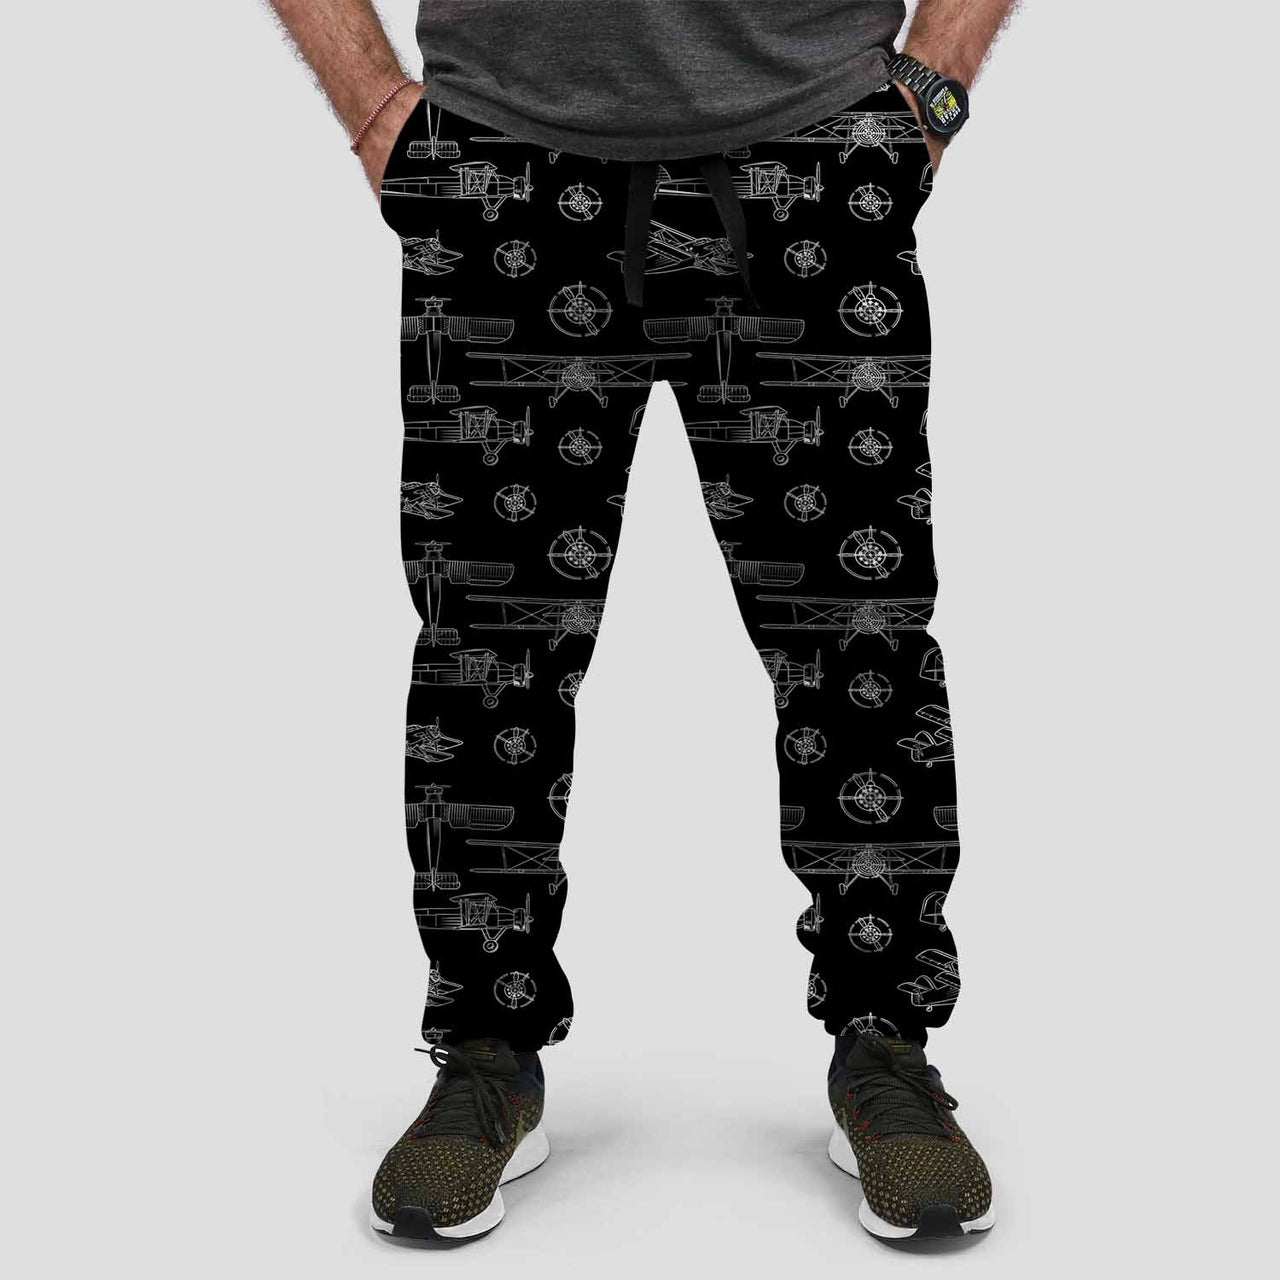 Propeller Lovers Designed Sweat Pants & Trousers